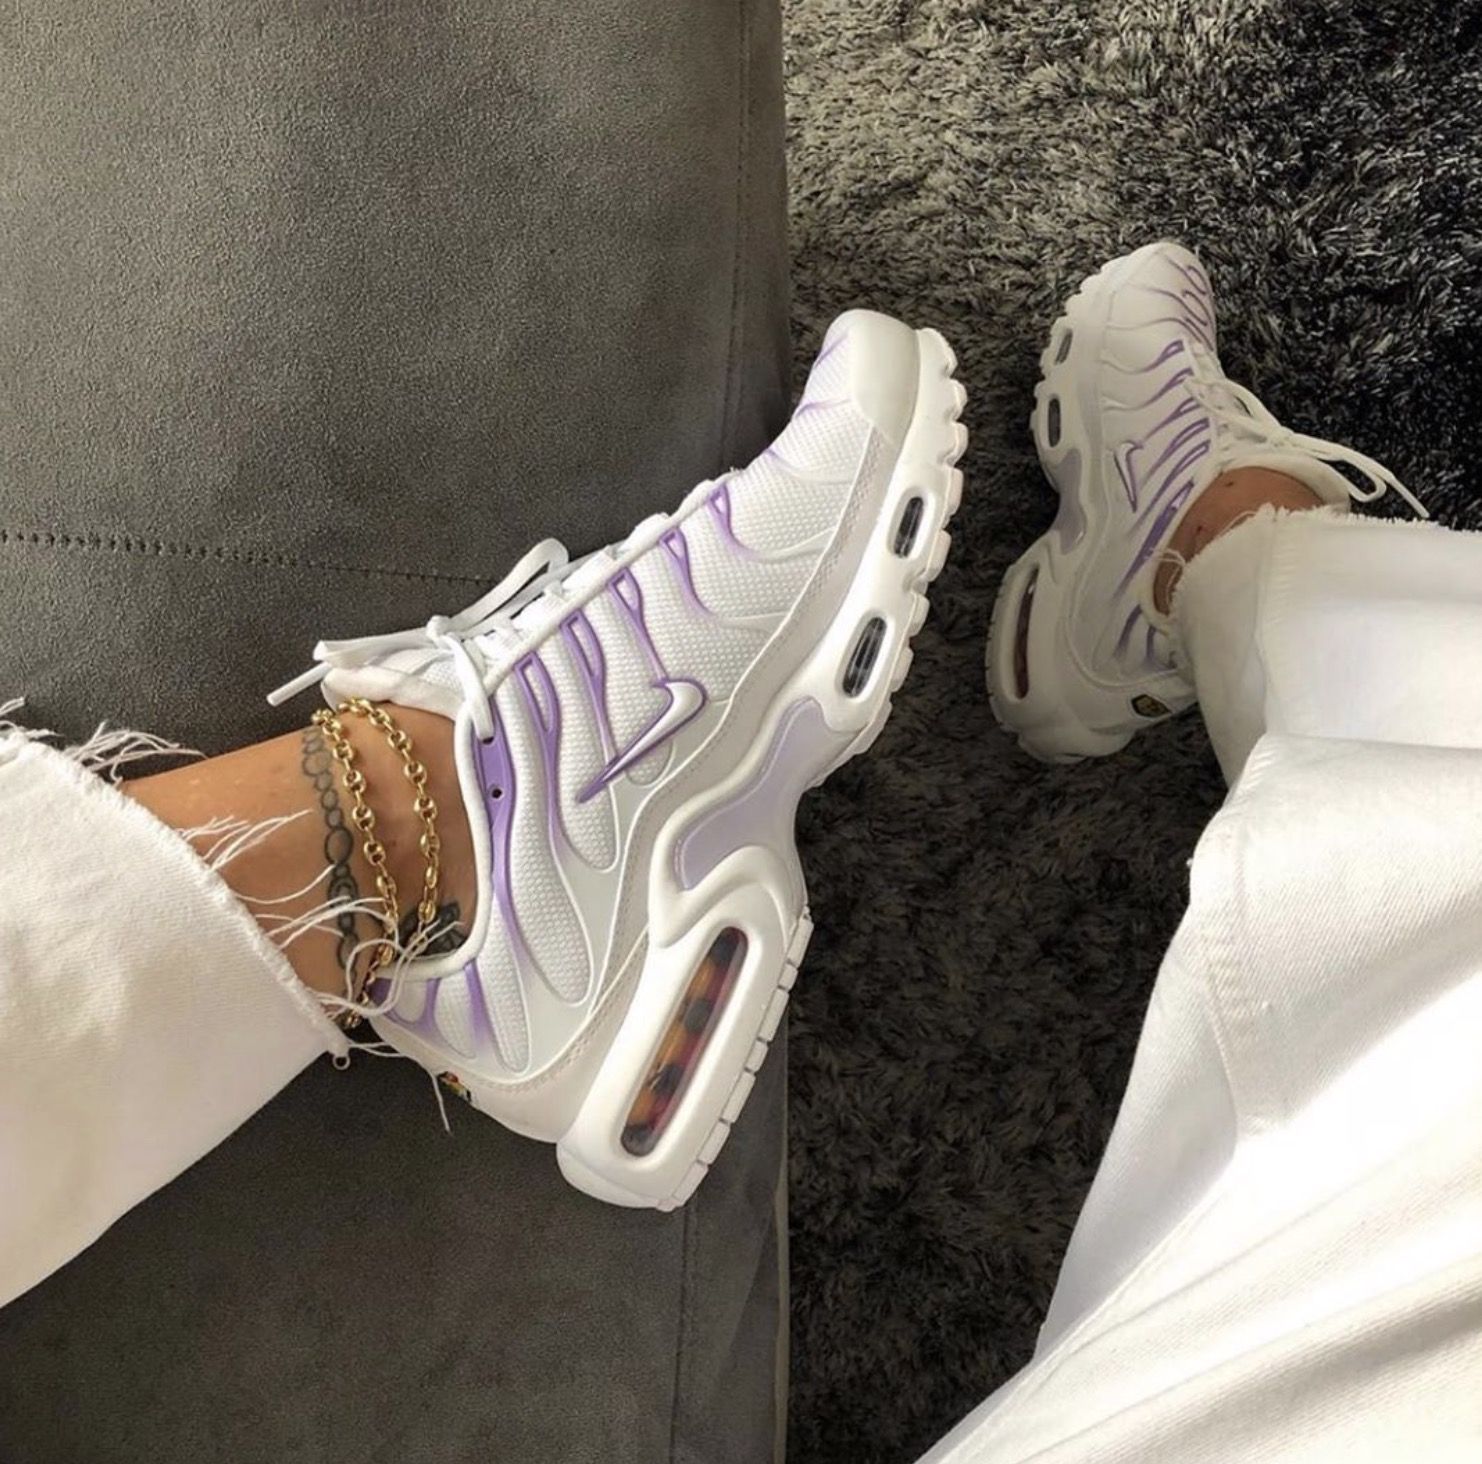 Ejecutar Auckland Asesino The Sole Womens on Twitter: "We are still loving this Nike Air Max Plus in  Space Purple 😍 Shop: https://t.co/BkR6MrGQ3K 📷ninidokovic  https://t.co/XMtL5VVJ9f" / Twitter